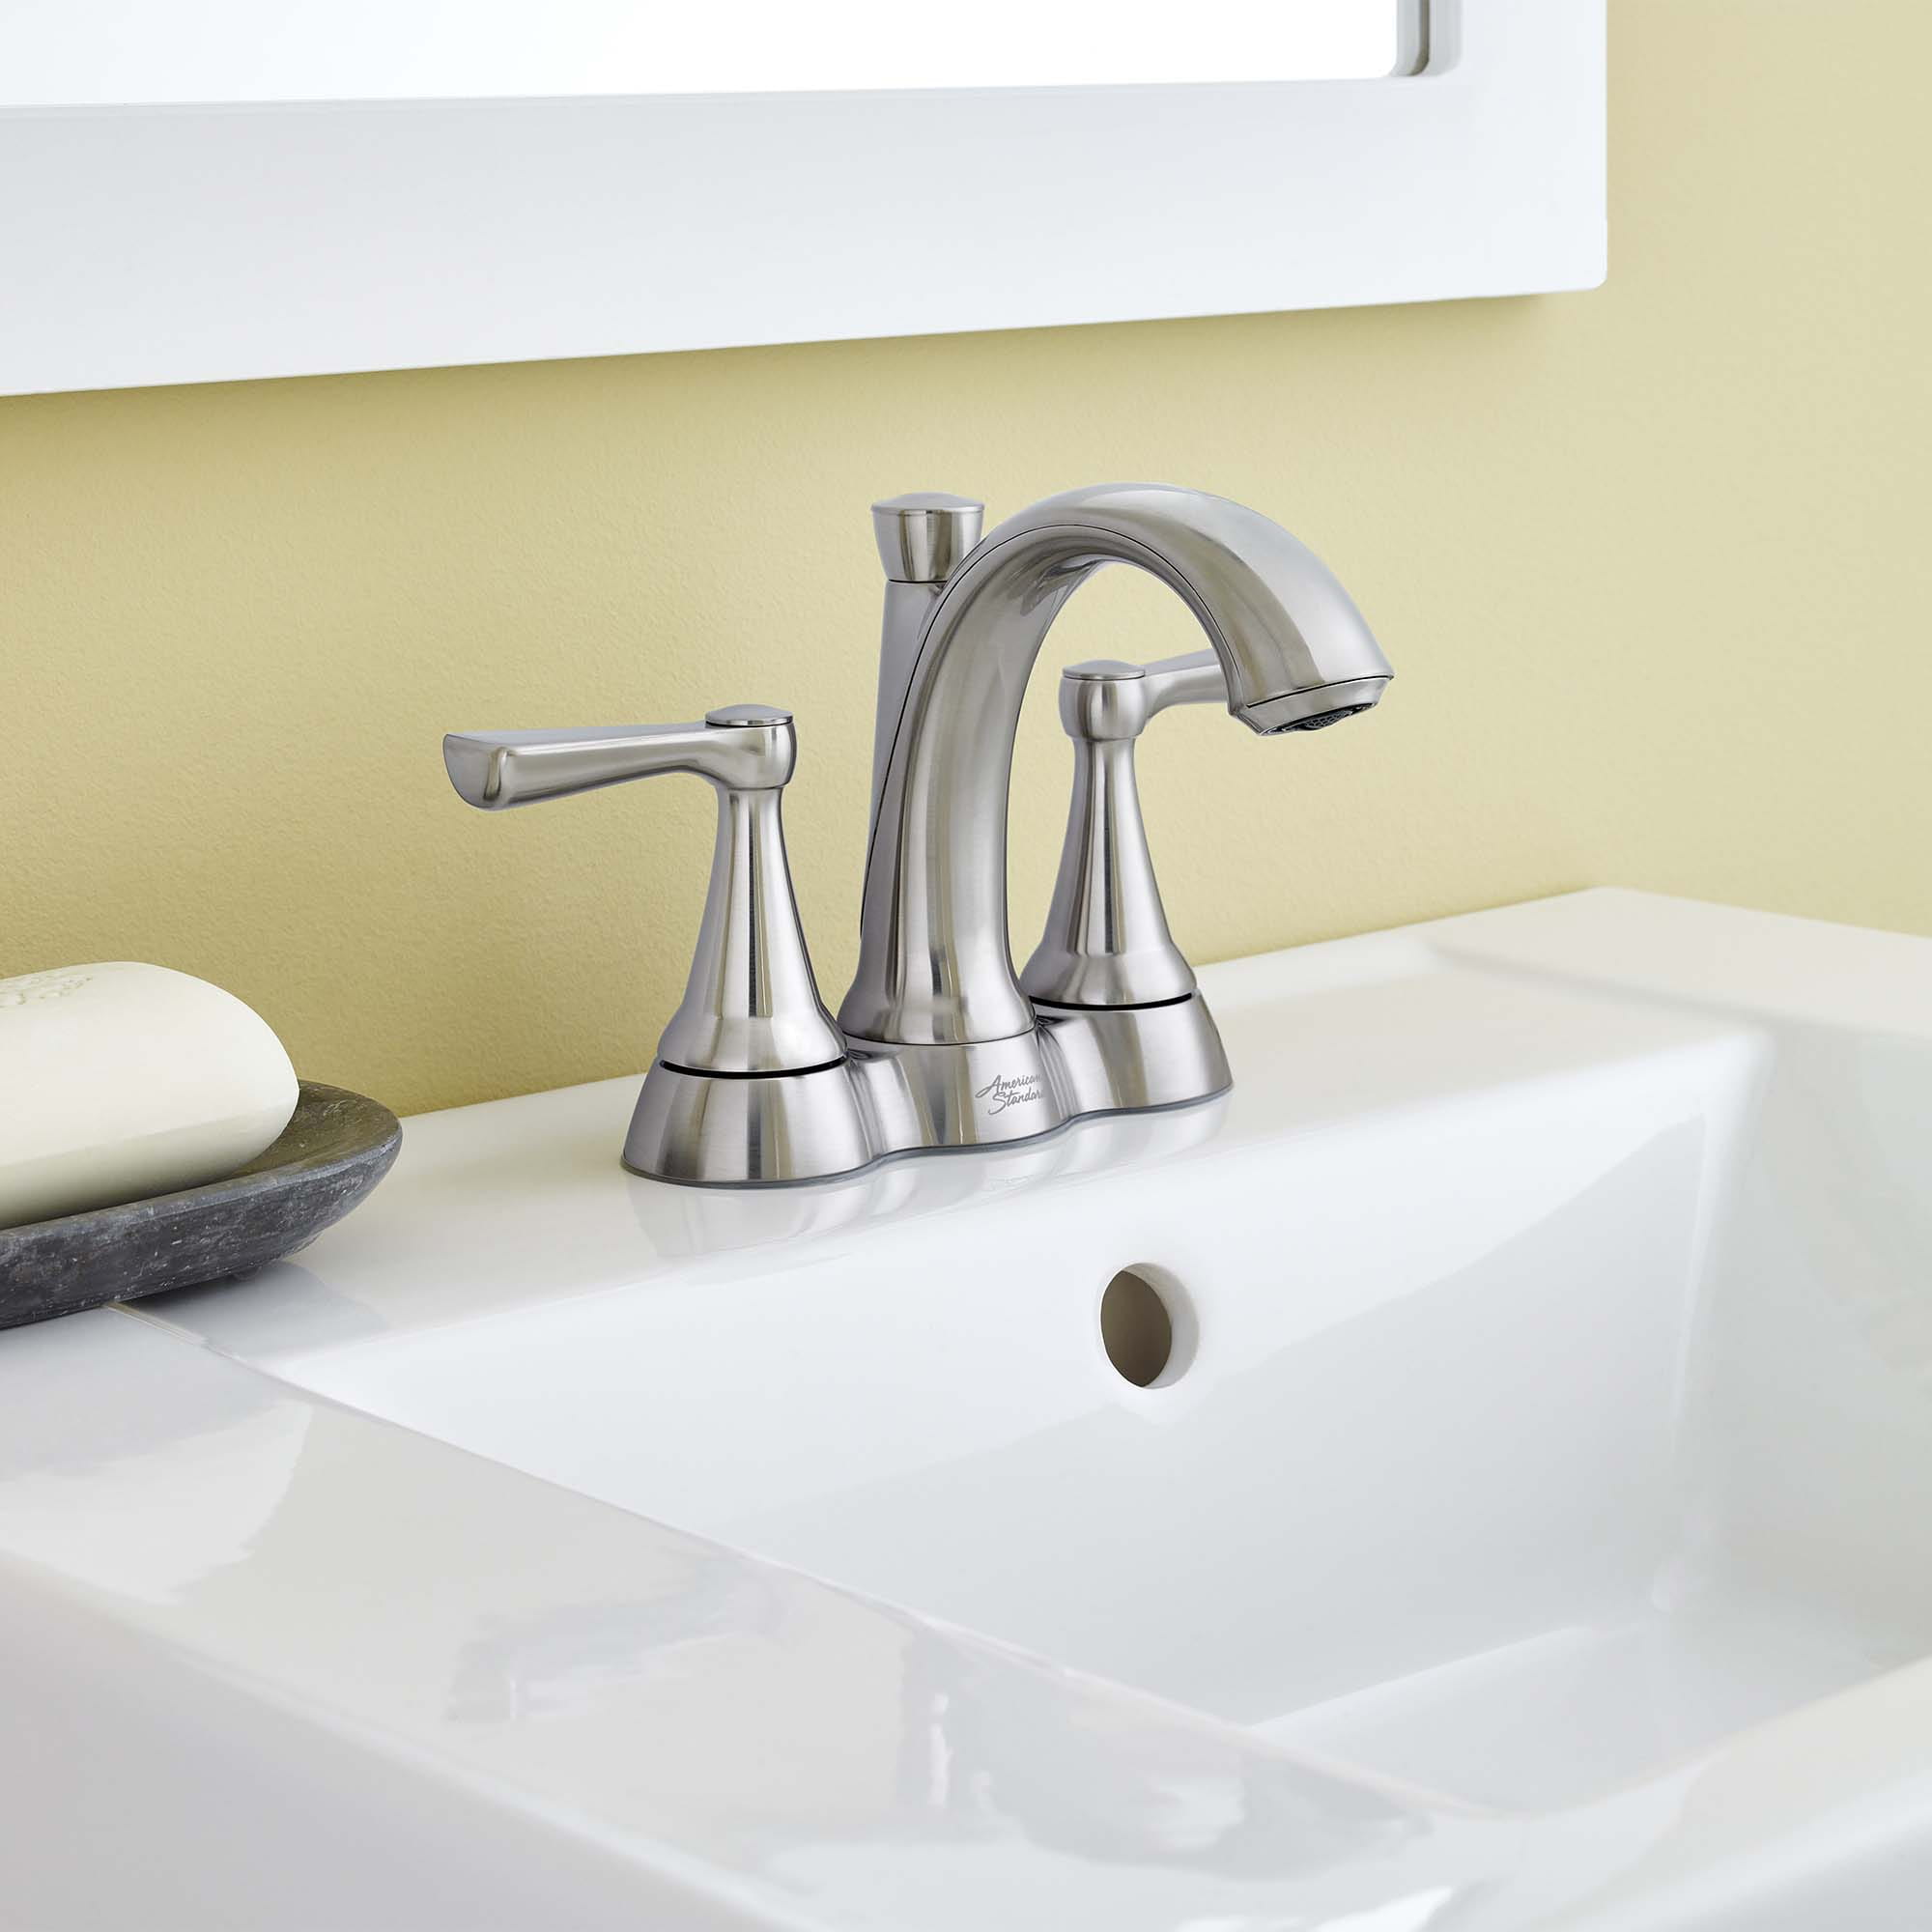 Kempton 4-In. Centerset 2-Handle Bathroom Faucet 1.2 GPM with Lever Handles